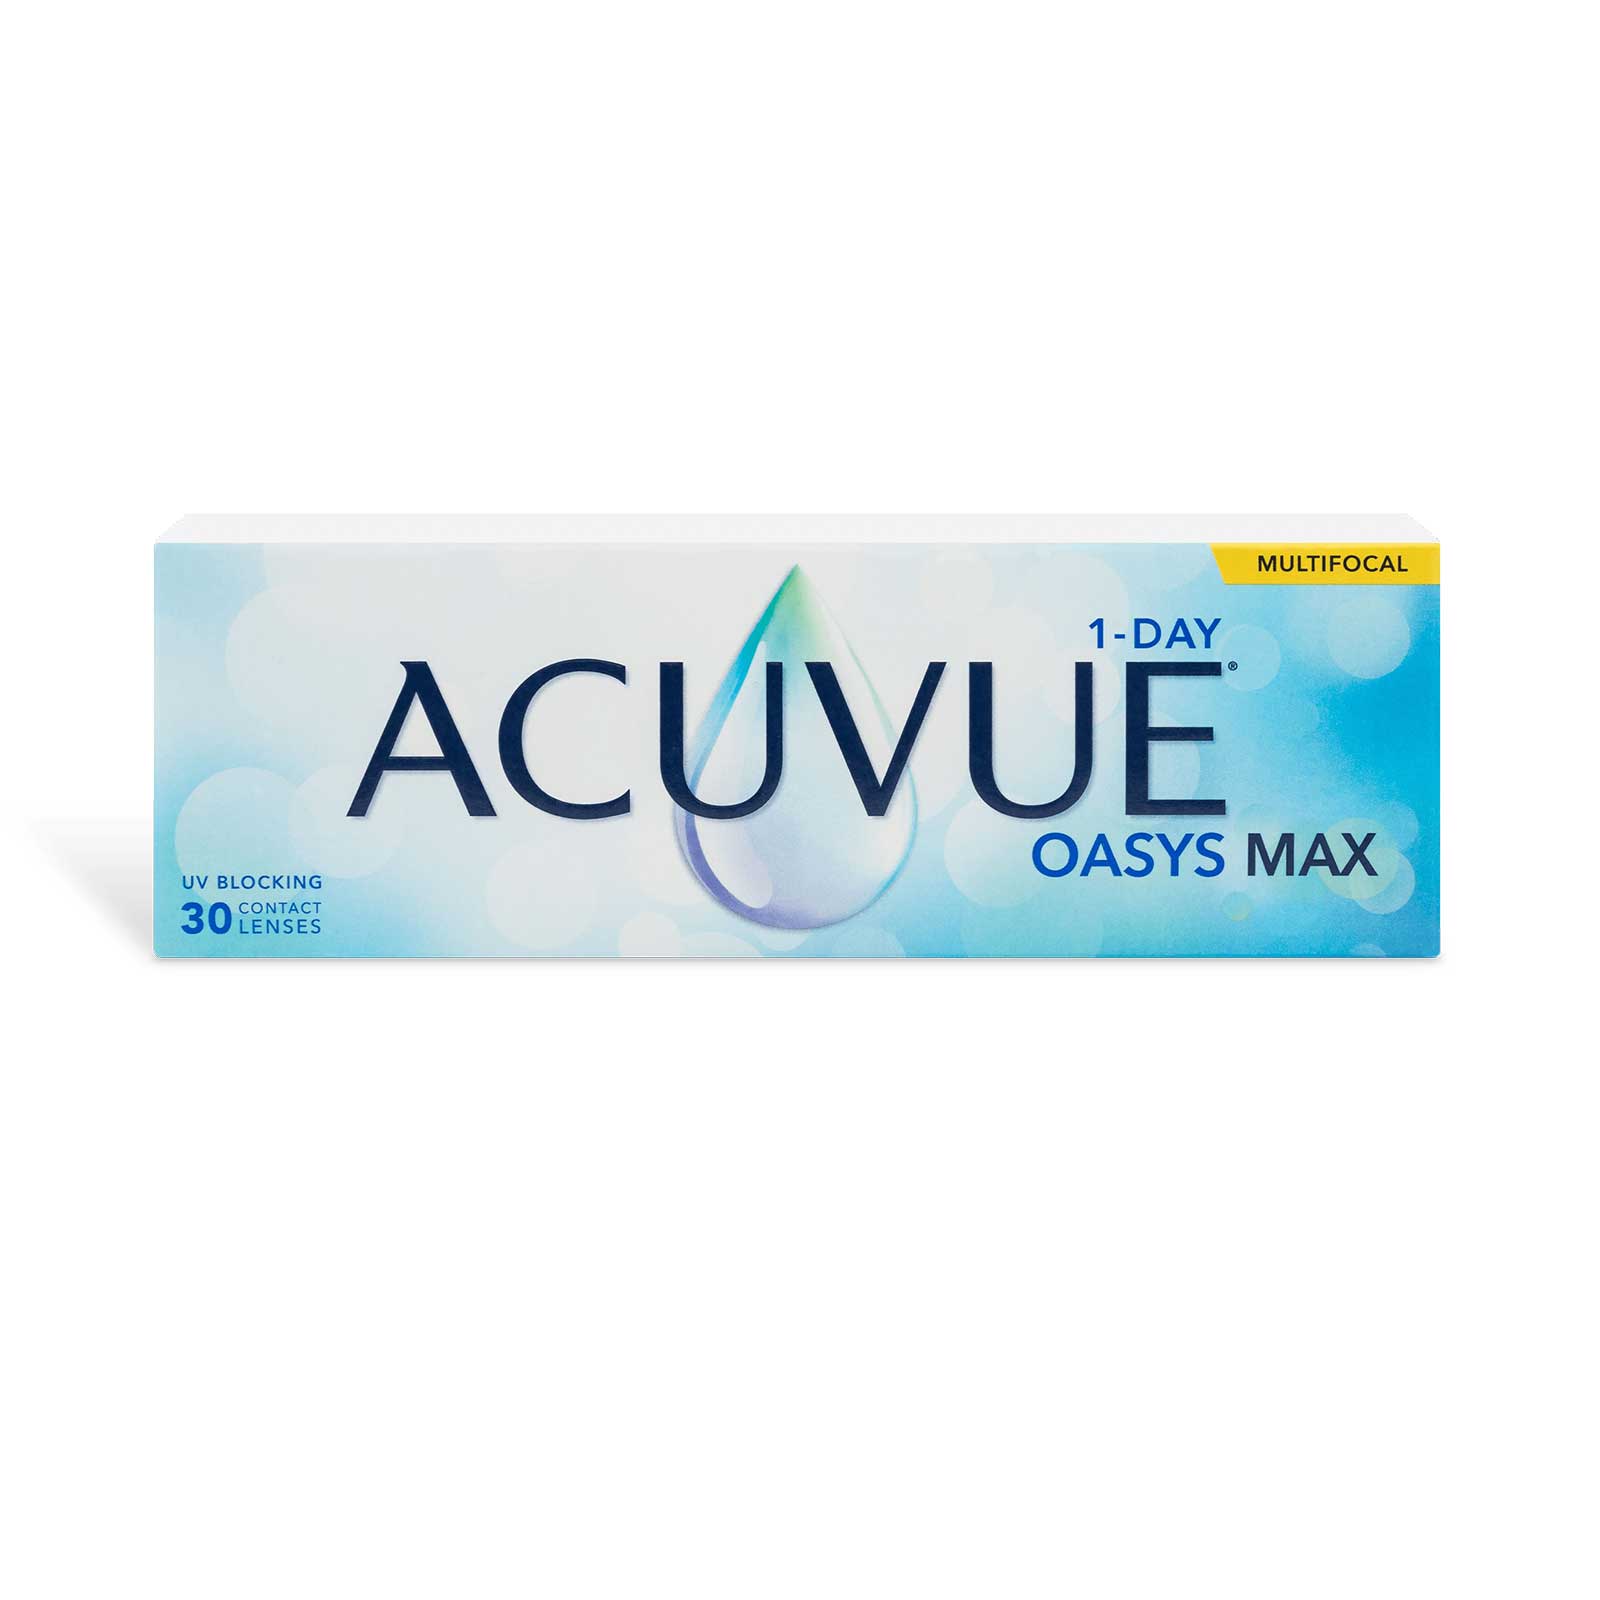 acuvue-oasys-max-1-day-pack-of-30-illusion-eyewear